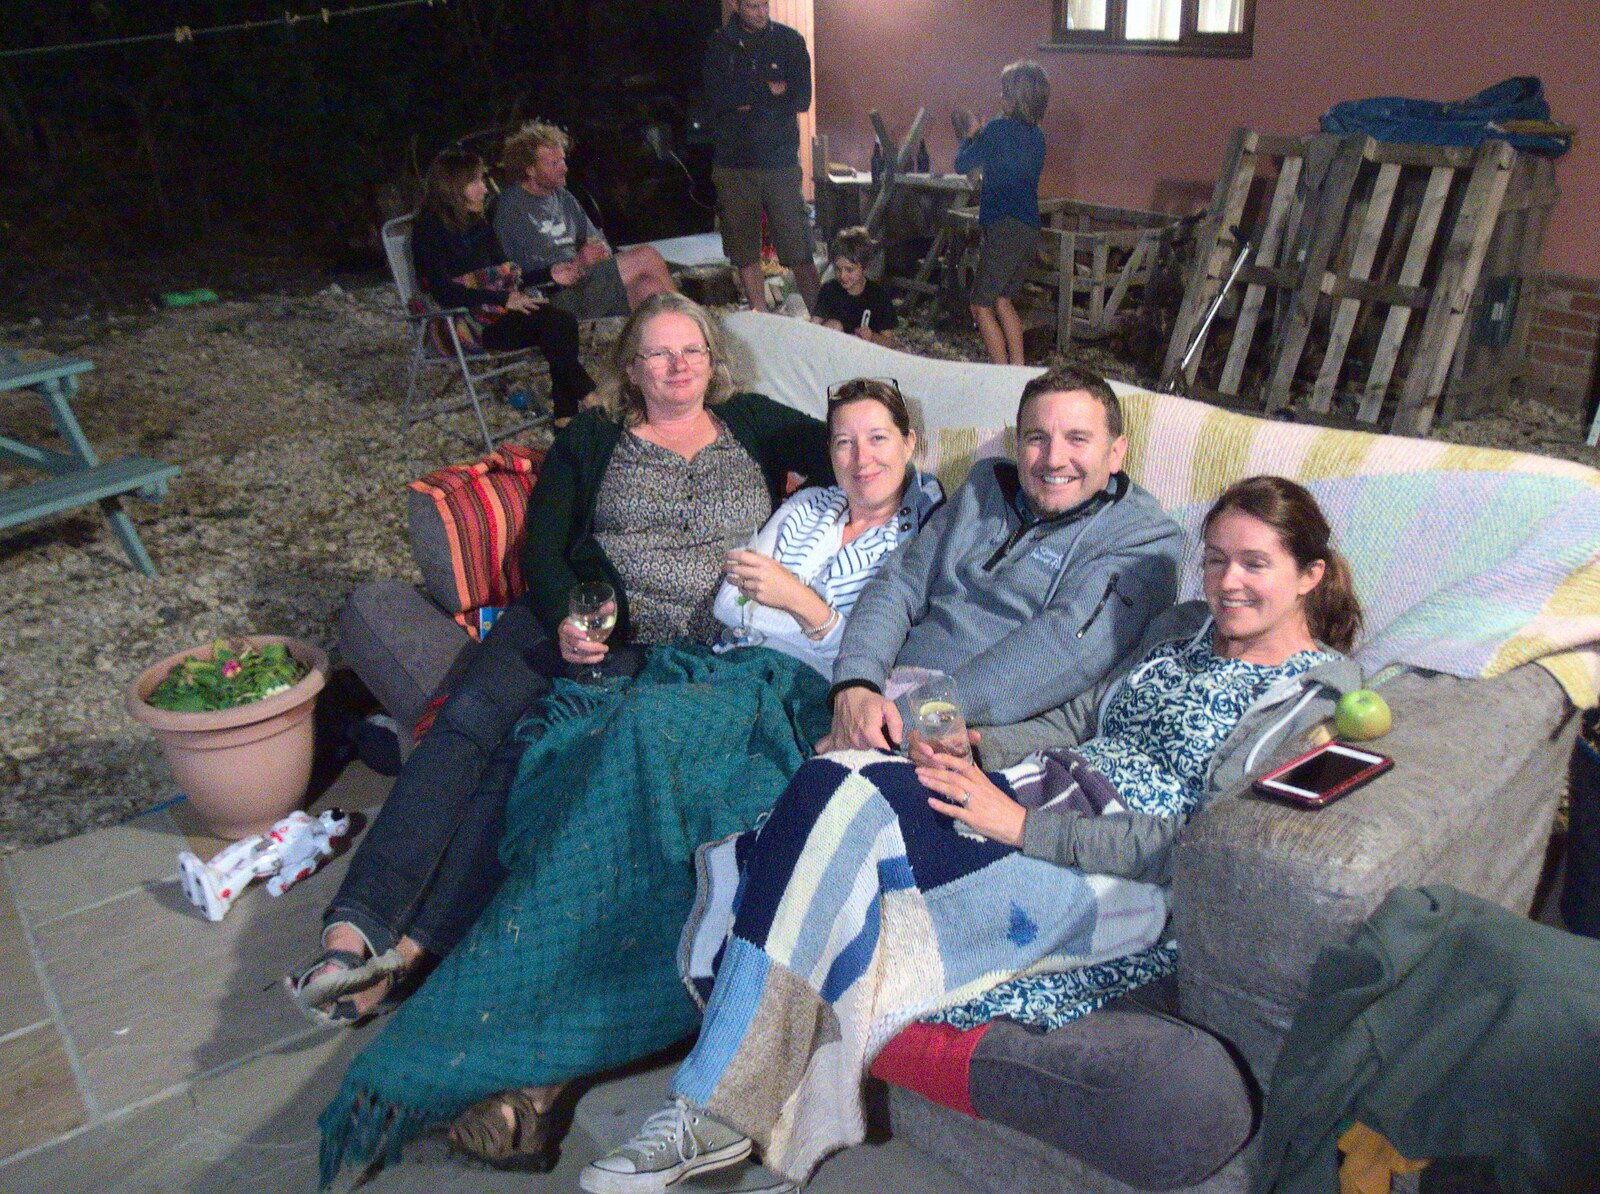 Mega, Suzanne, Clive and Isobel on the sofa from A Summer Party, Brome, Suffolk - 18th August 2018